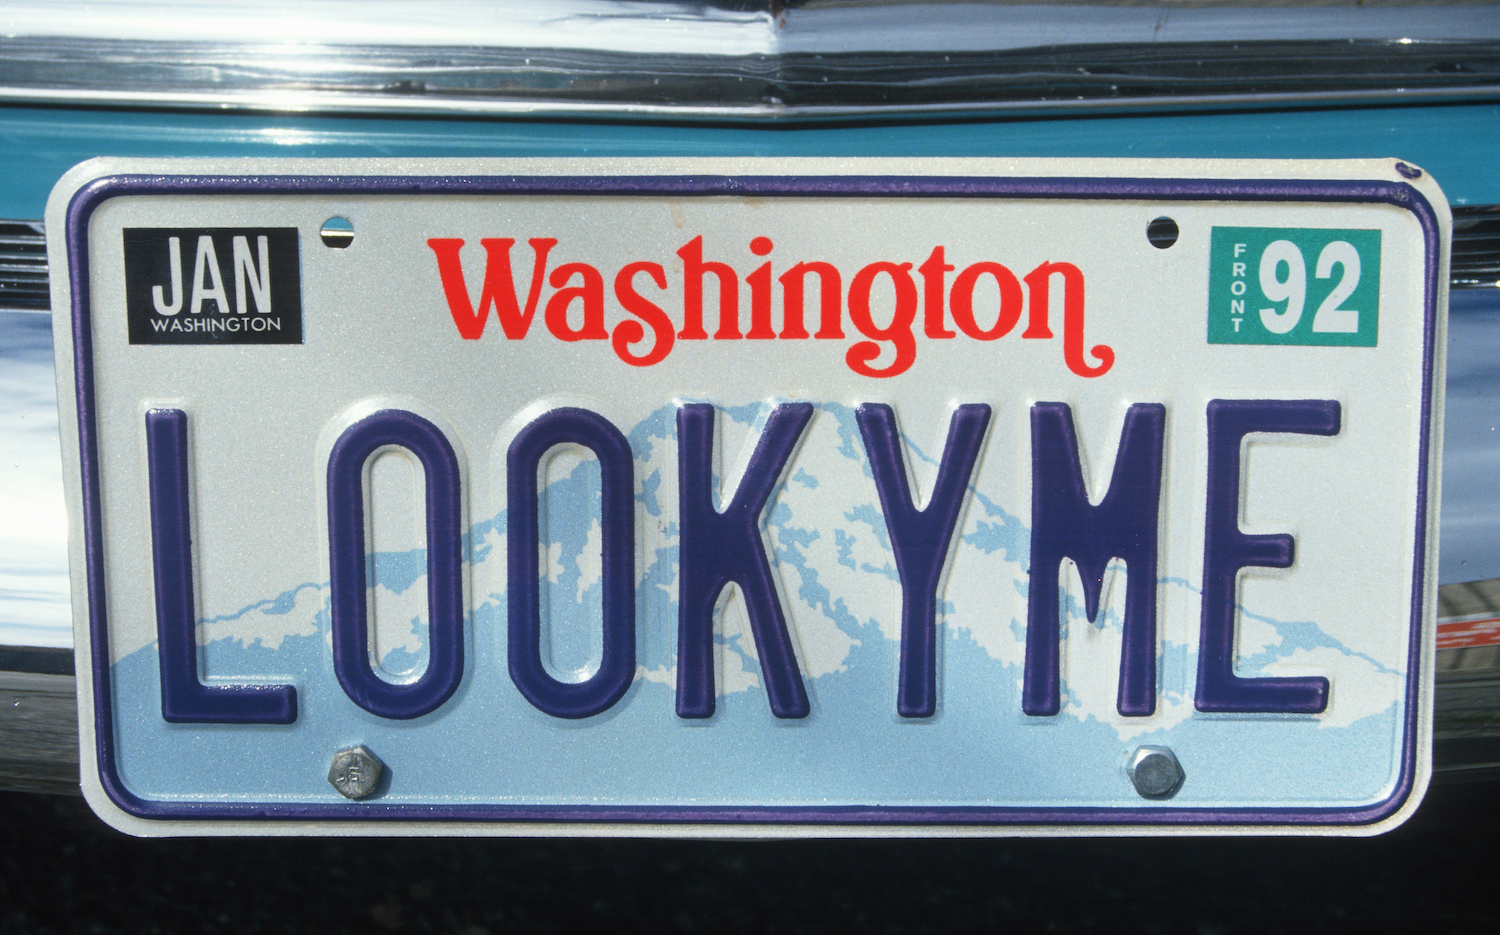 A blue on white Washington state license plate personalized to say "LookyMe"